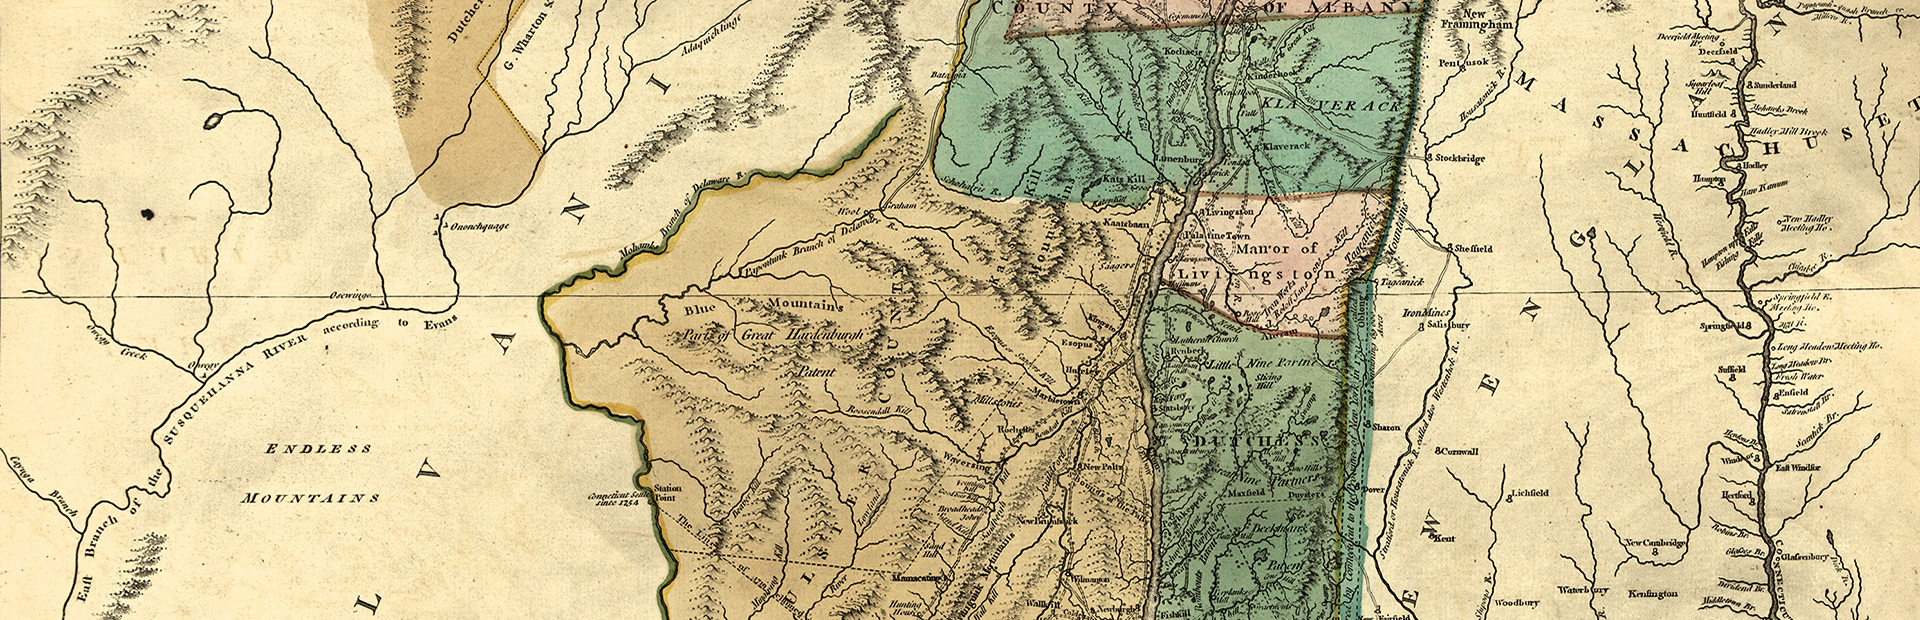 detail of upper Hudson RIver Valley from 1776 General Holland map